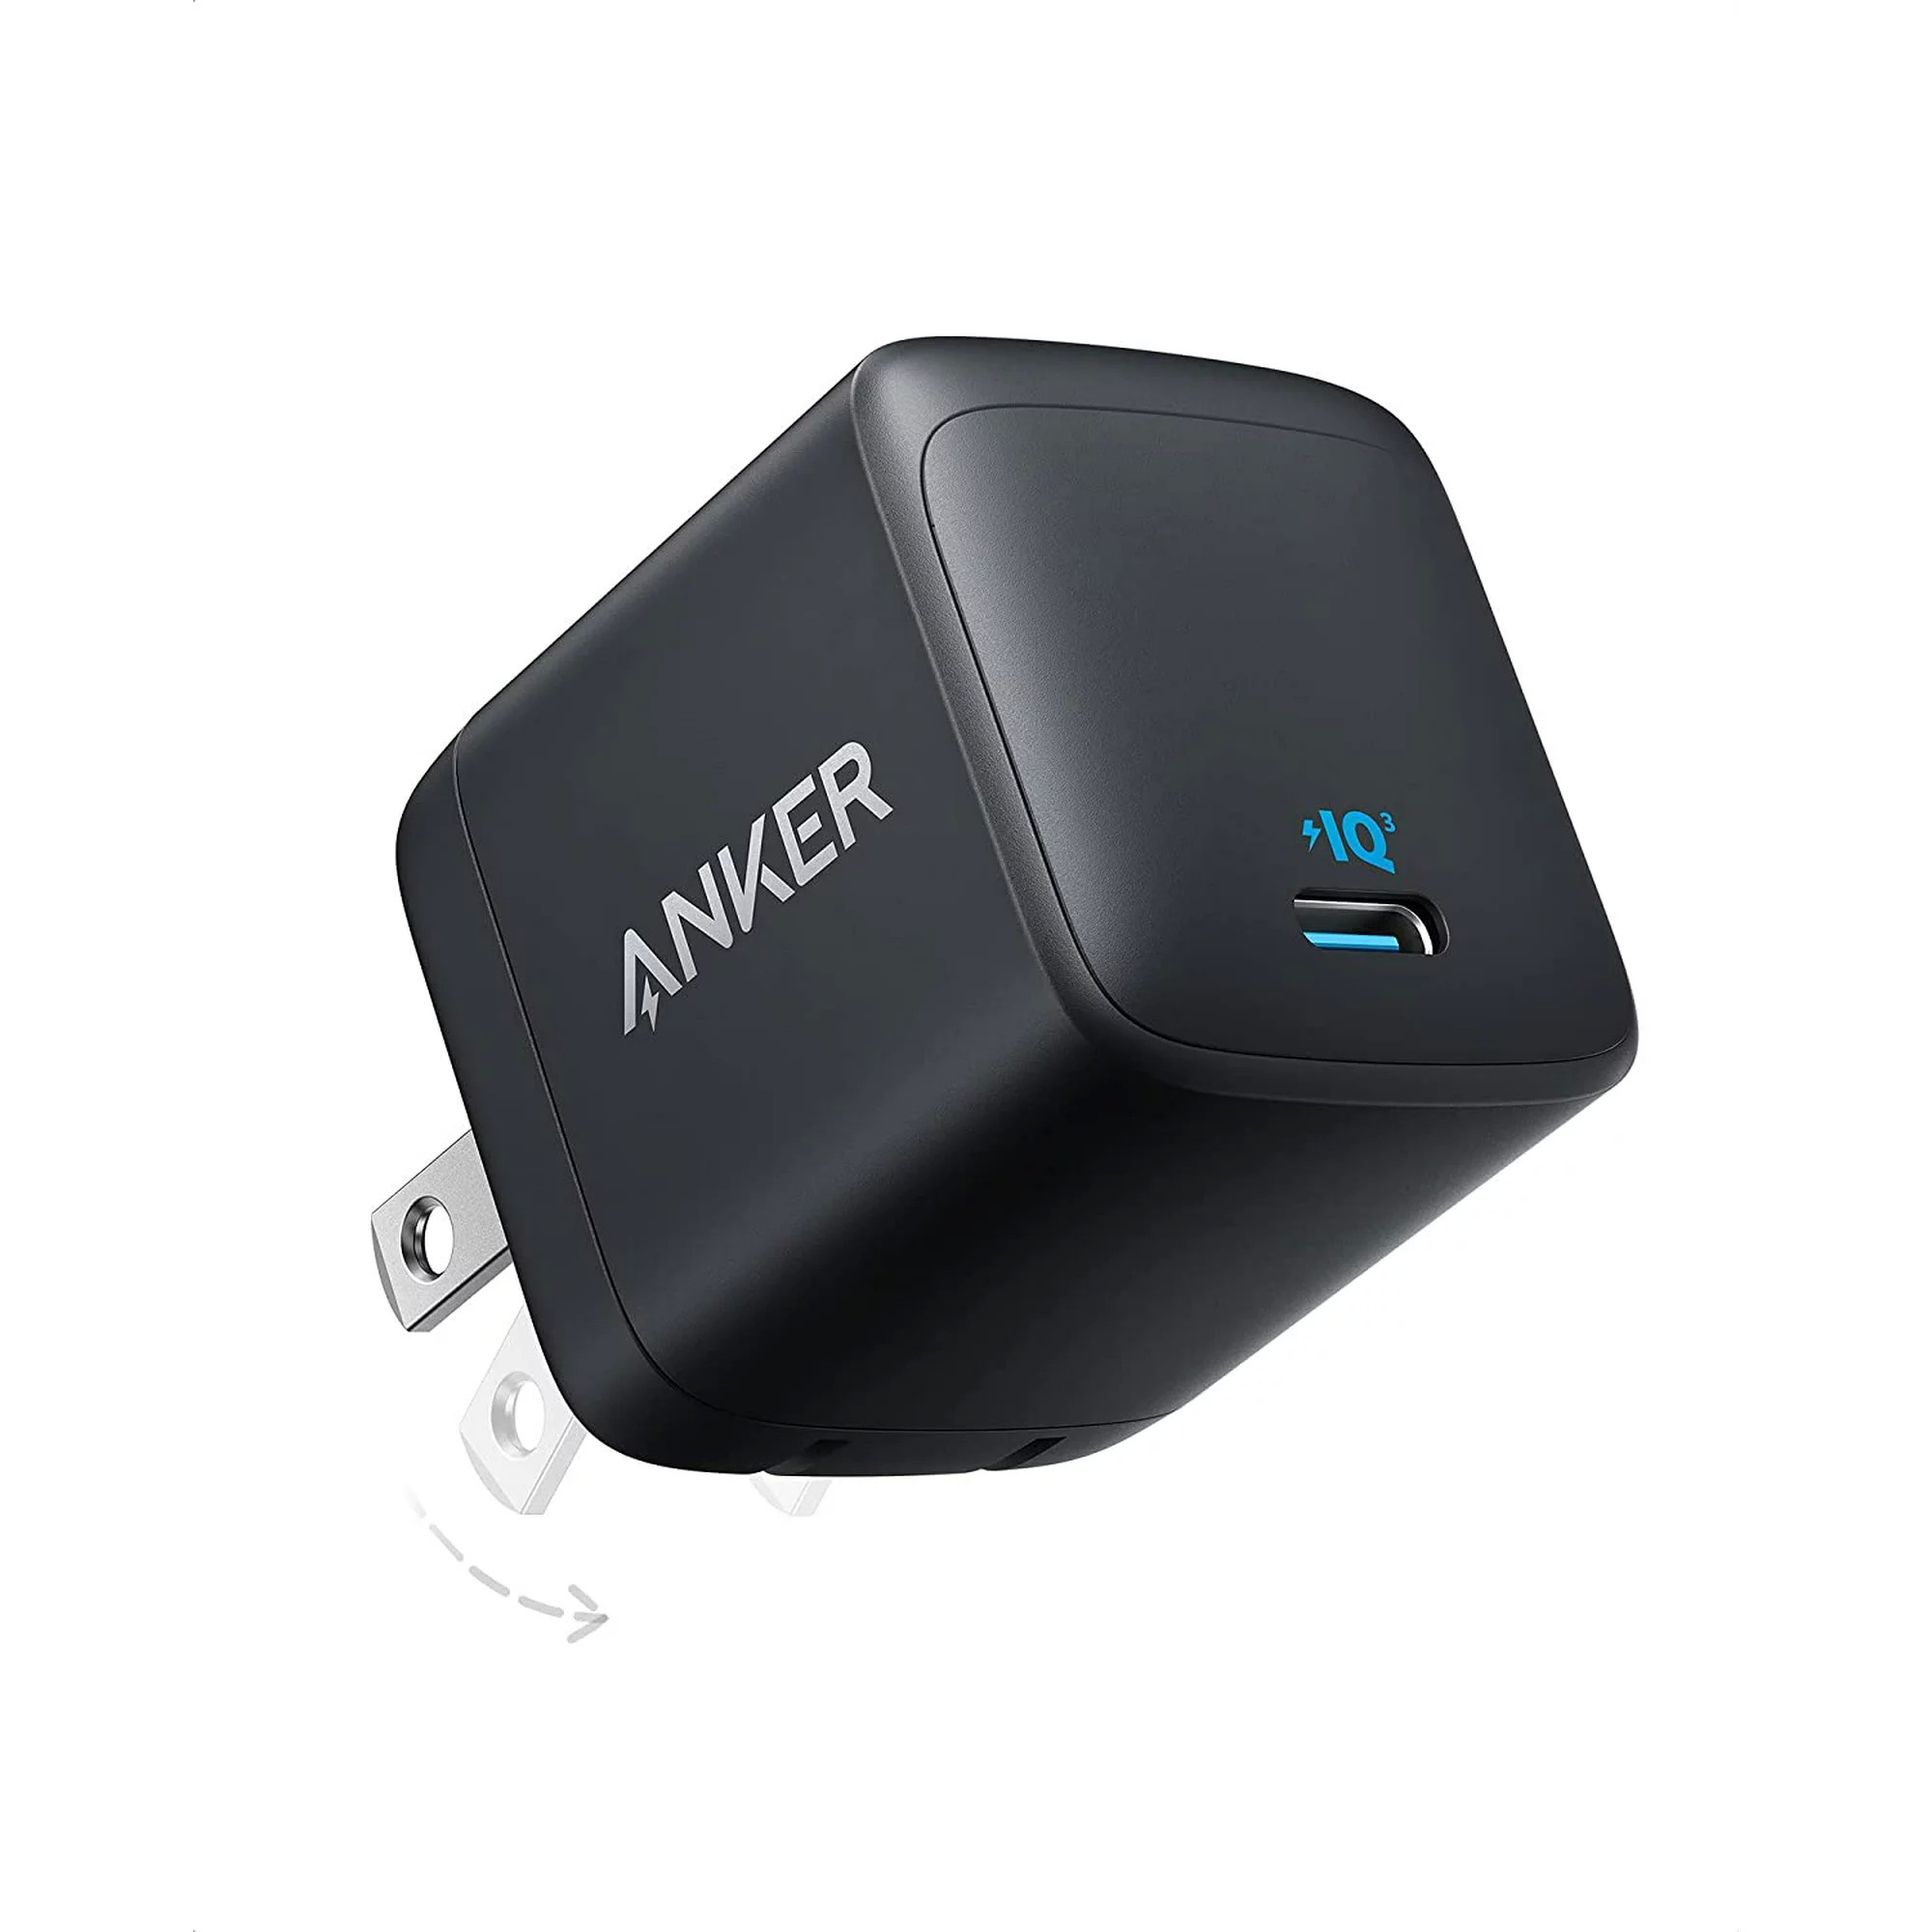 45W Anker USB C 313 Fast Charger $18 + Free Shipping